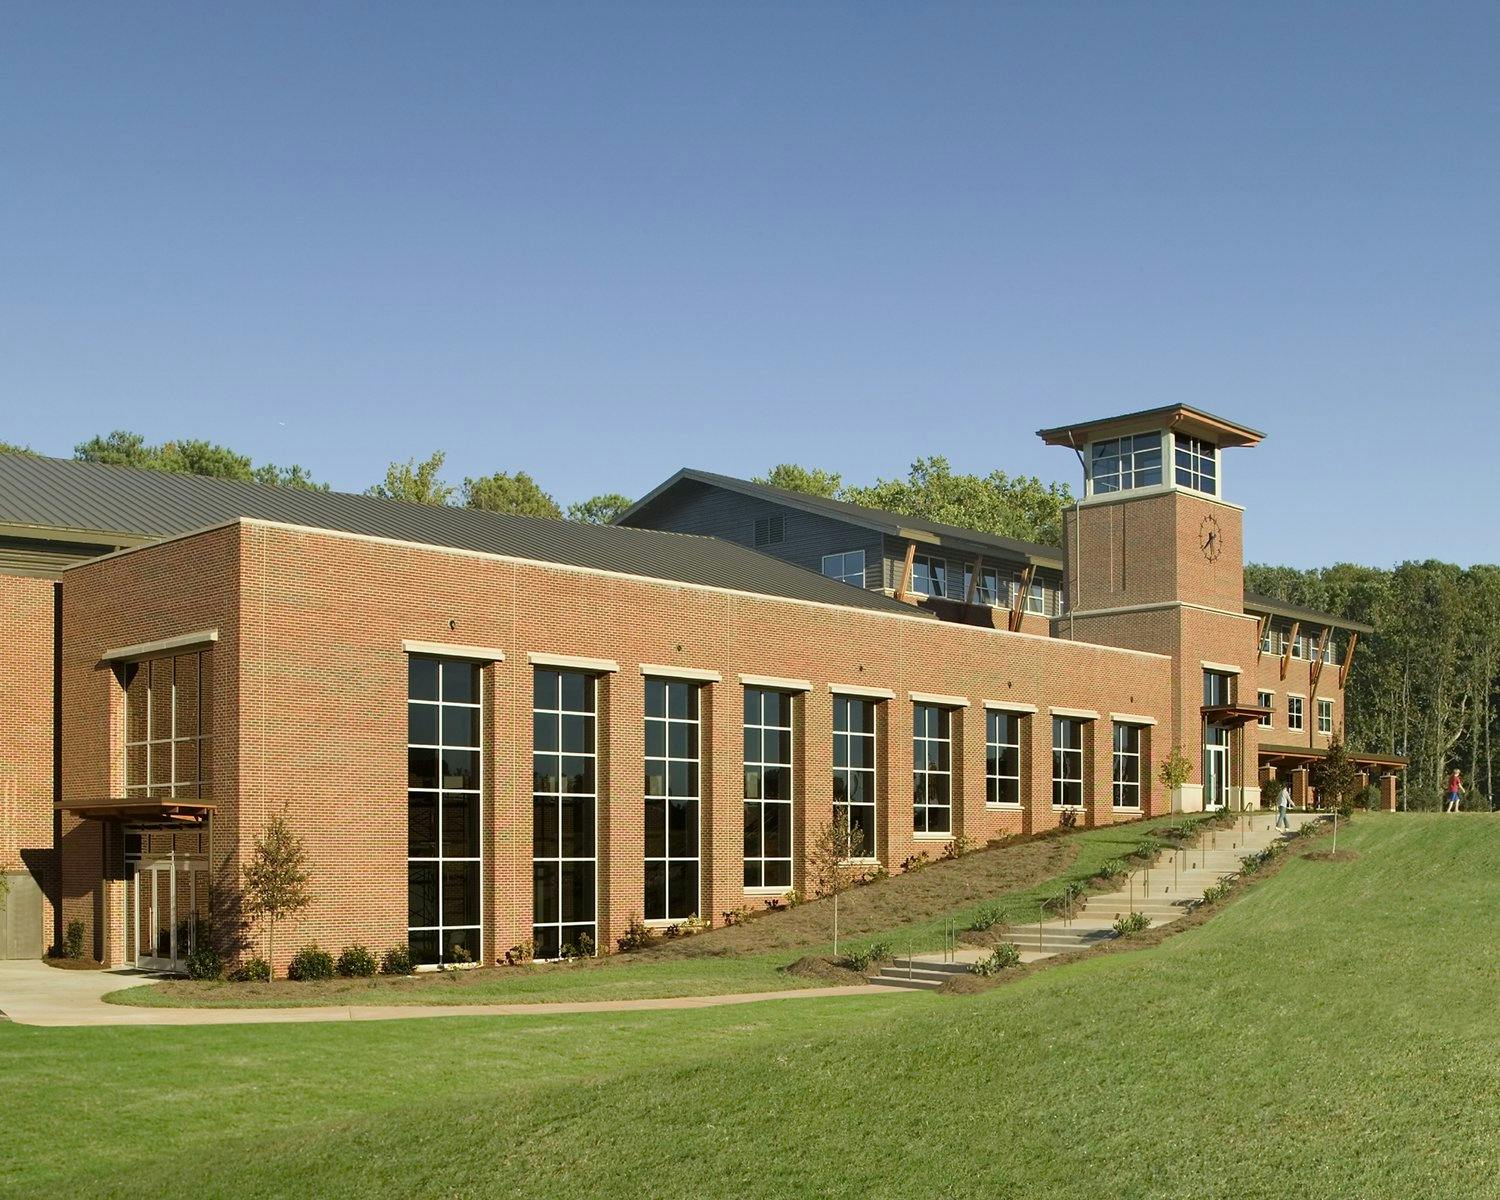 Stairs on a grassy hill lead to the entrance of a brick structure school featuring a clock tower.